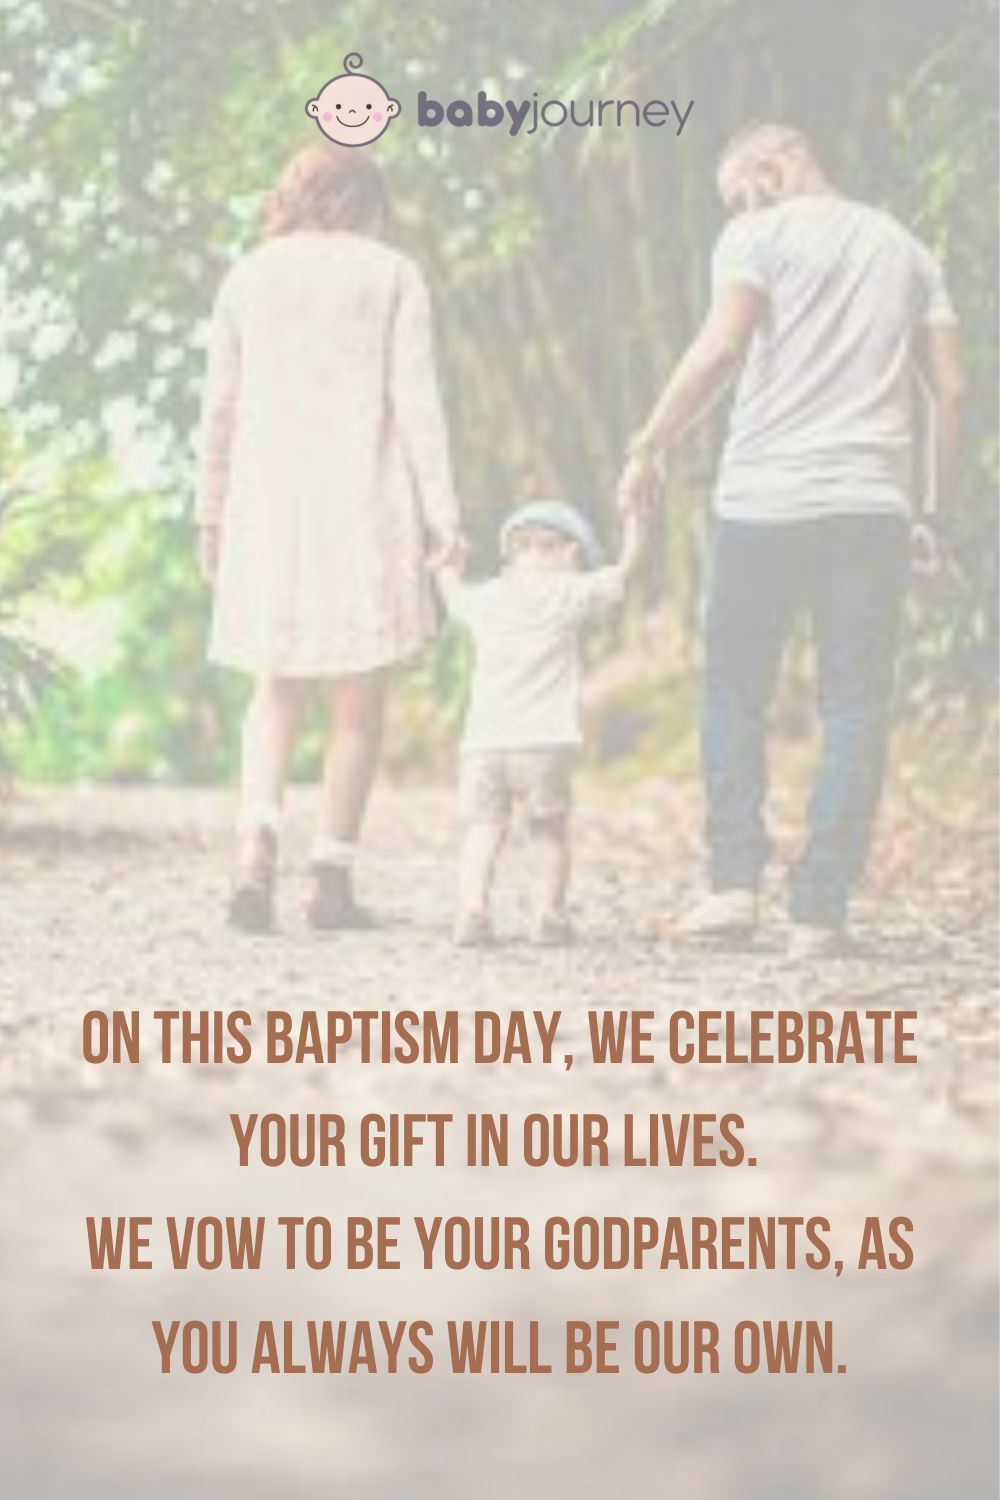 On this baptism day, we celebrate your gift in our lives. We vow to be your godparents, as you always will be our own. - Godparents quotes for baptism - Baby Journey